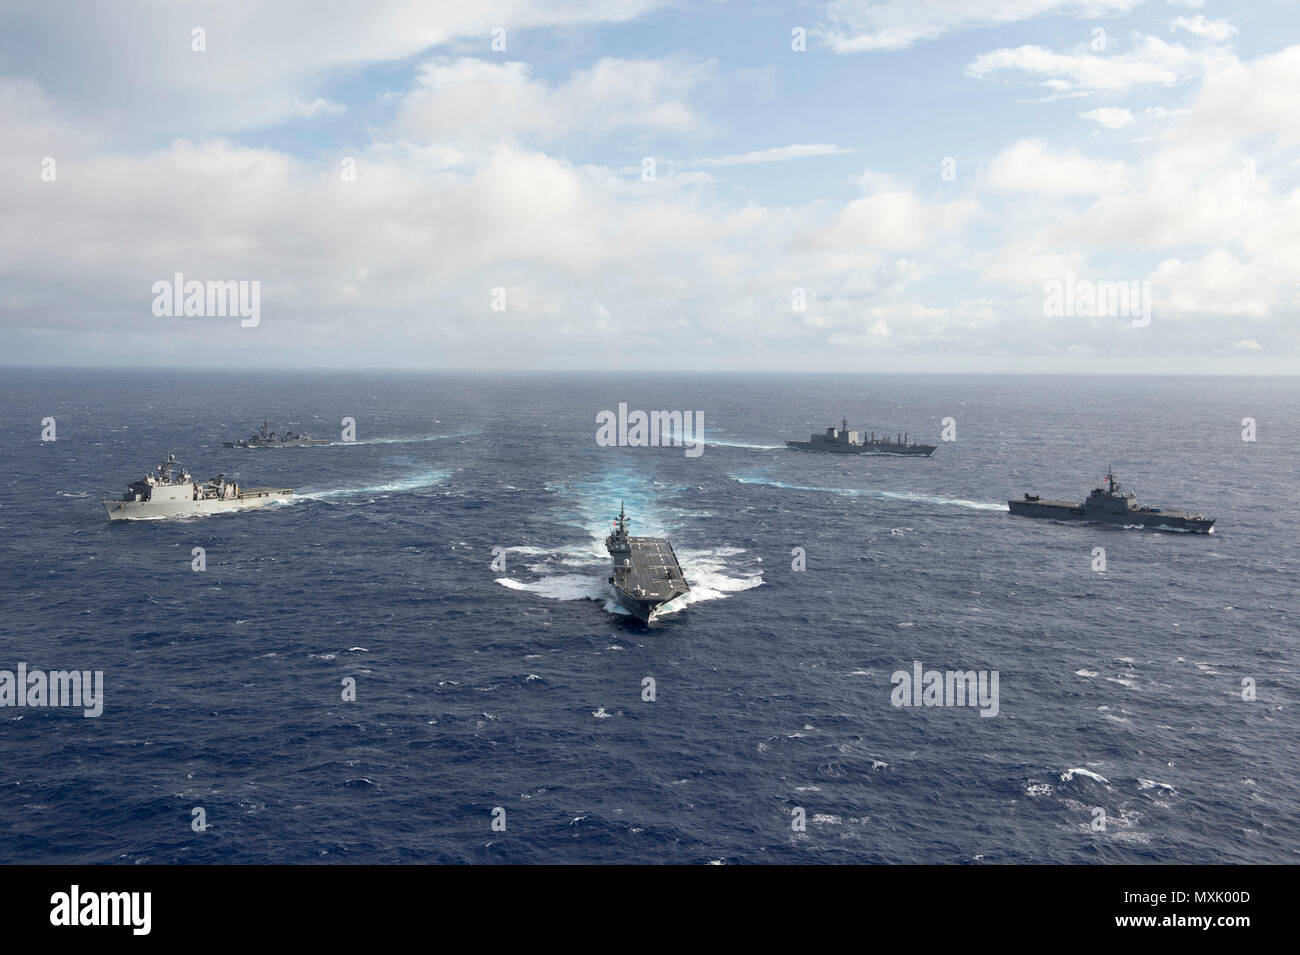 161106-N-ZK021-255 PACIFIC OCEAN (Nov. 6, 2016) - Ships participating in Keen Sword 2017 steam in formation during a photo exercise. Keen Sword 17 is a joint and bilateral field training exercise (FTX) between U.S. and Japanese forces meant to increase readiness and interoperability within the framework of the U.S. – Japan alliance. (U.S. Navy photo by Petty Officer First Class Nardel Gervacio/Released) Stock Photo